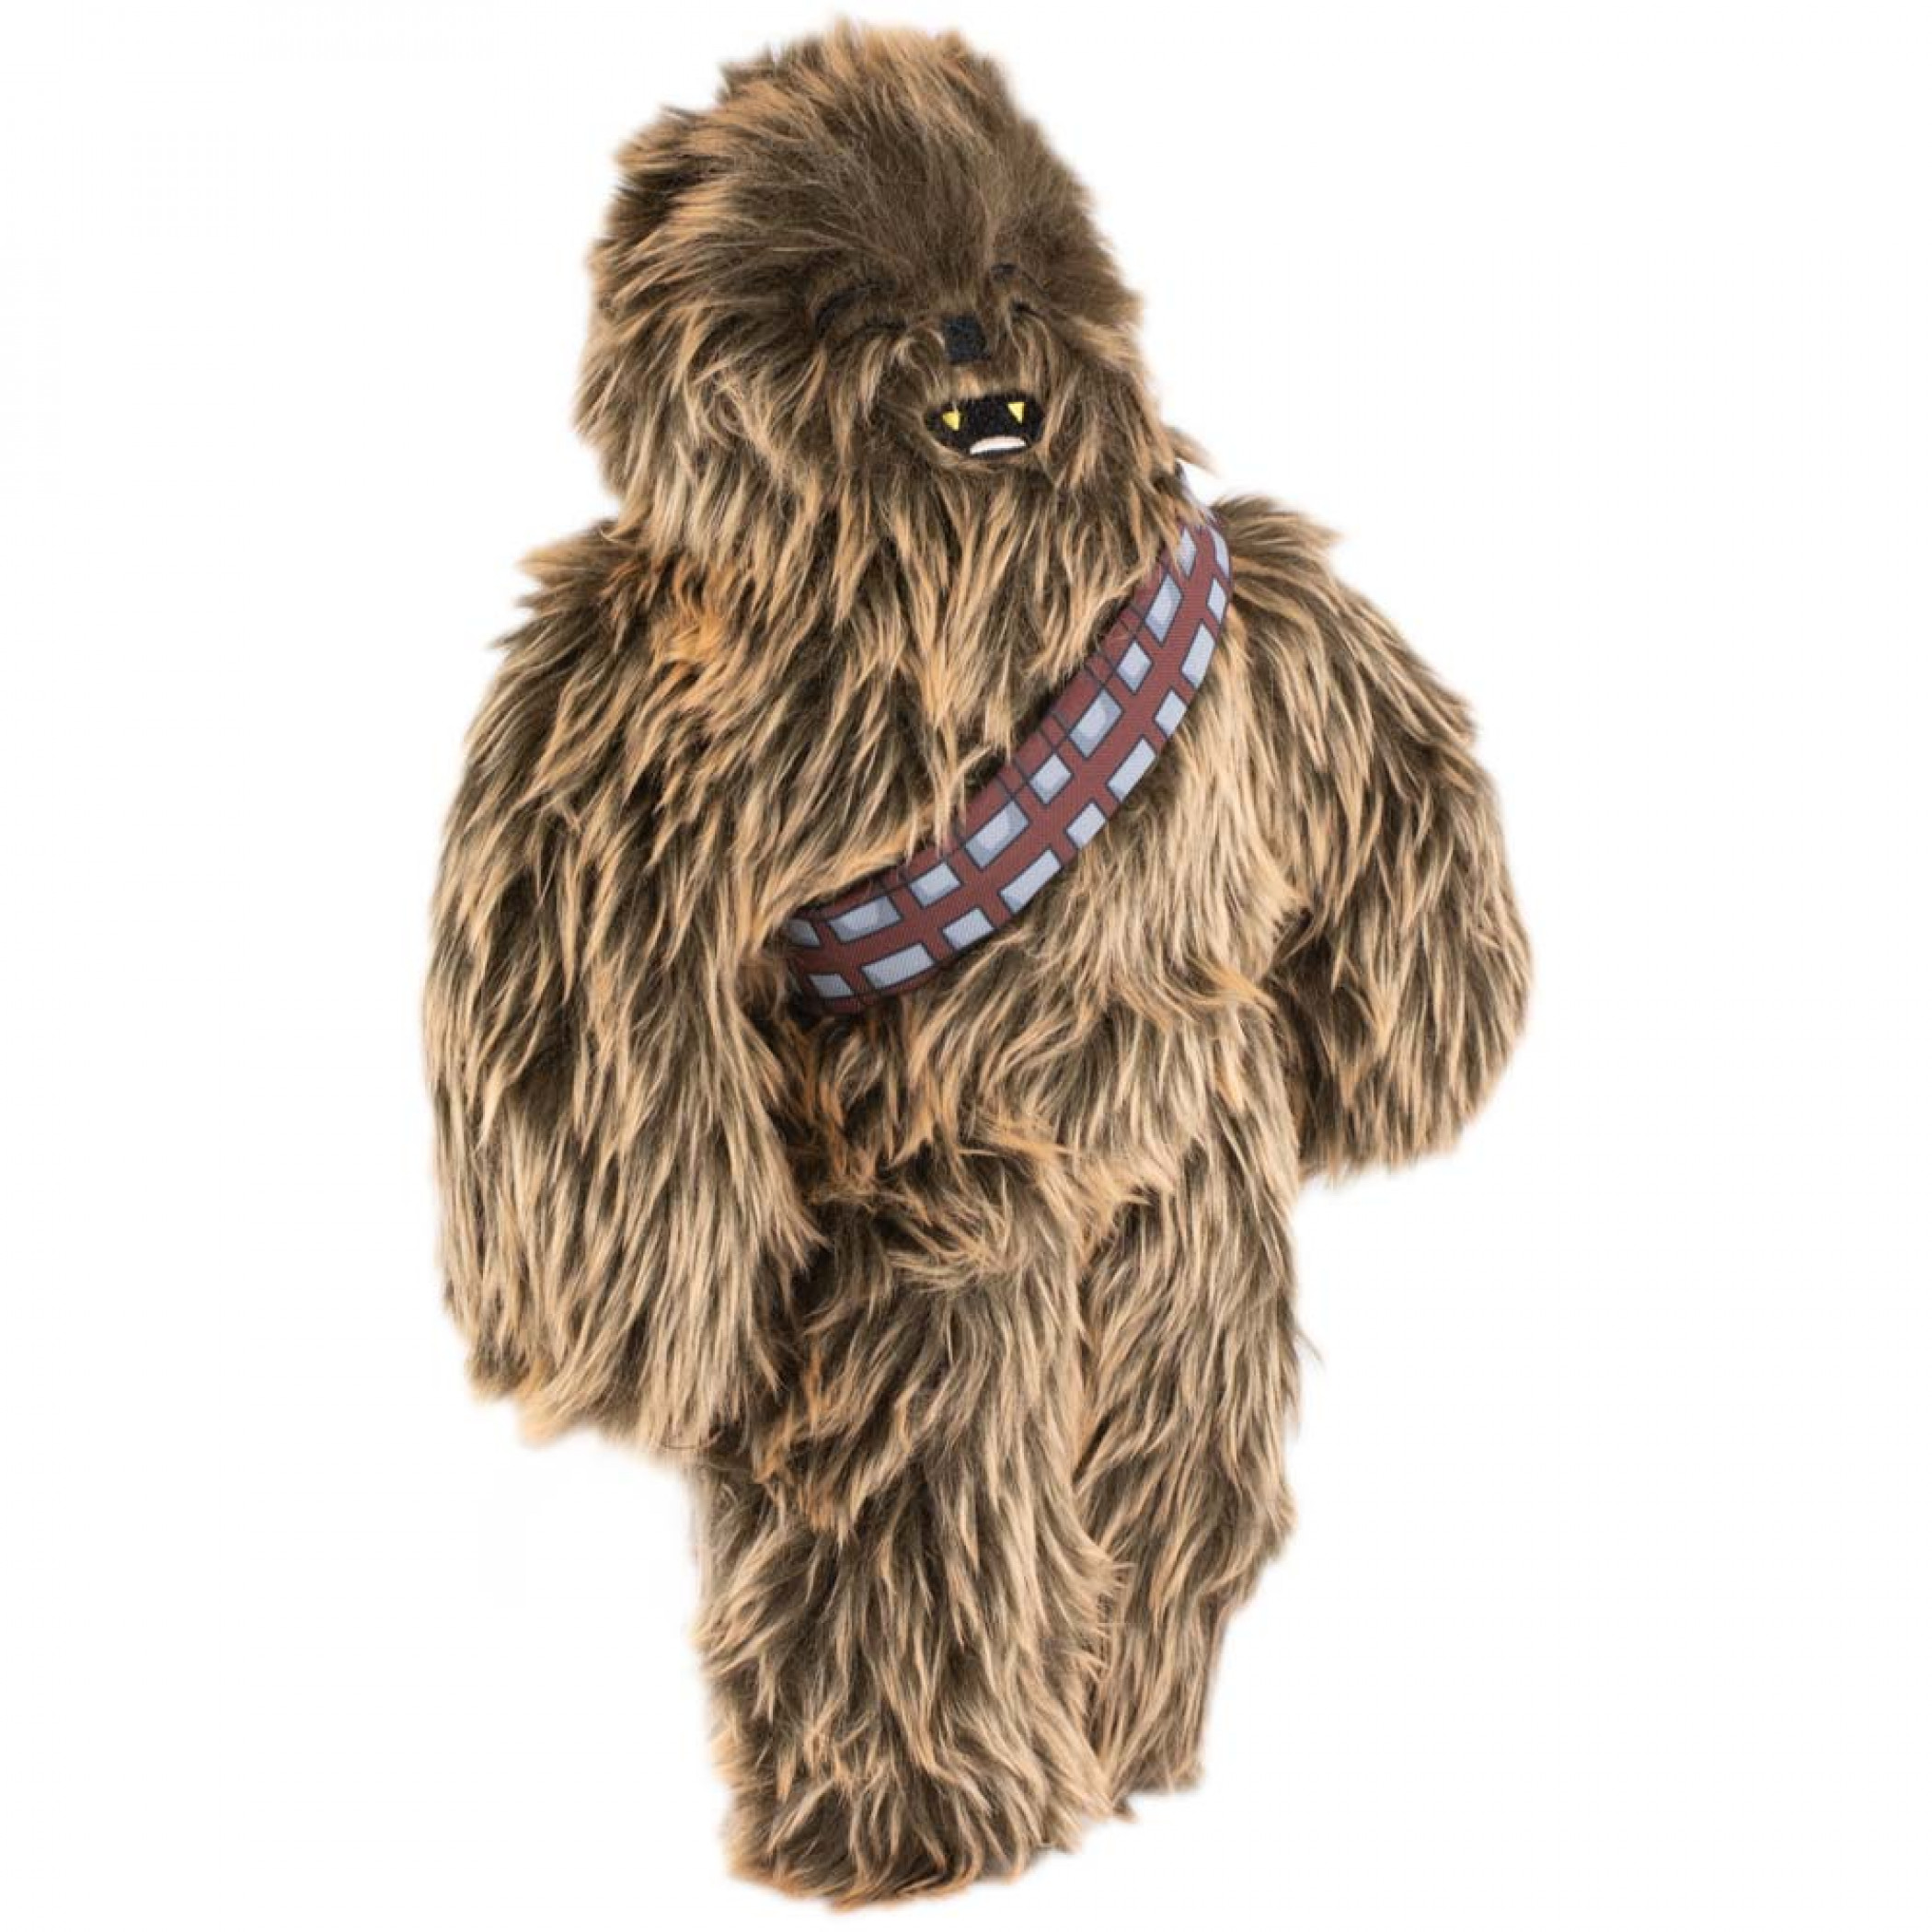 Star Wars Chewbacca Squeaker Plush Large Dog Toy